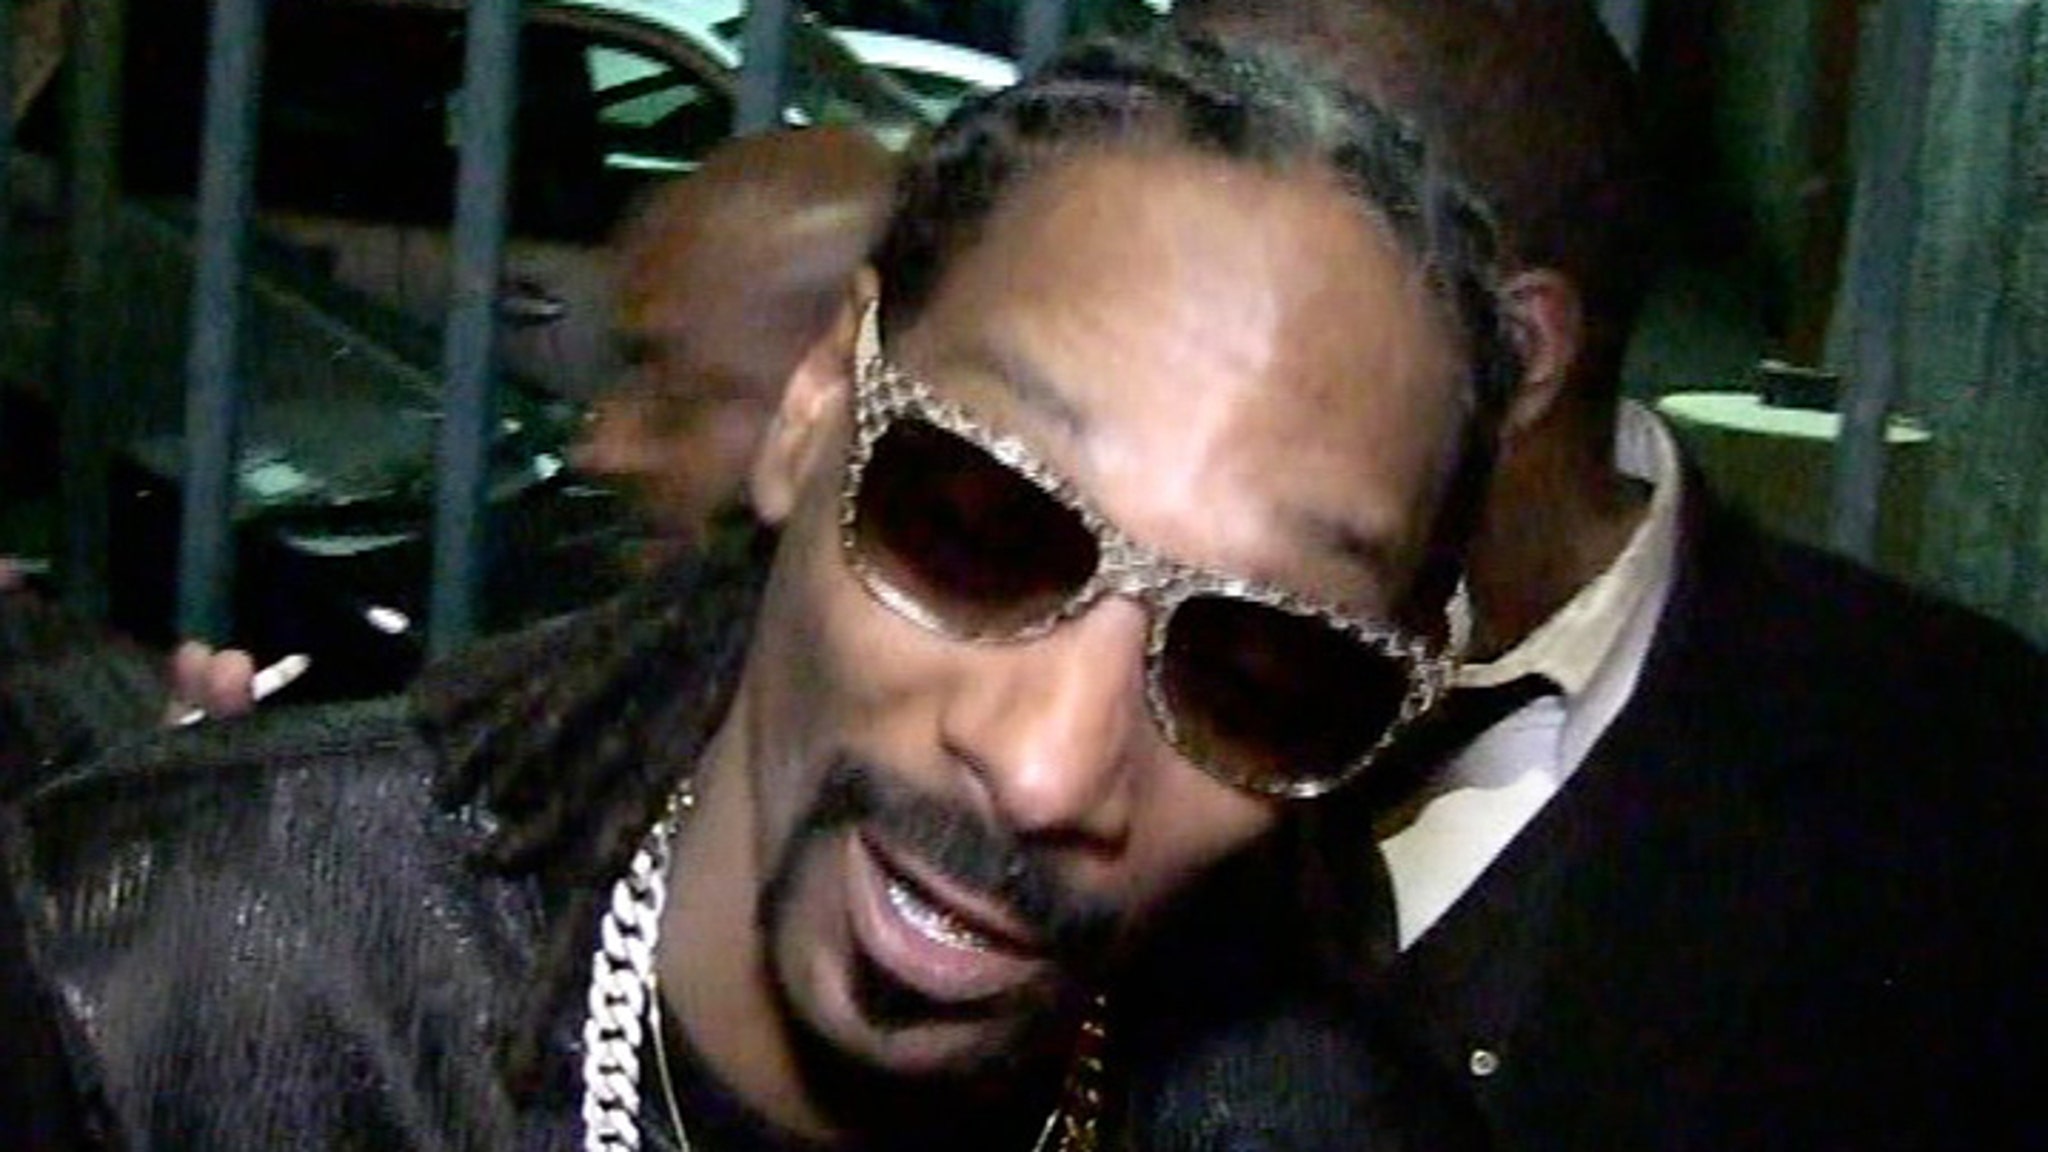 Snoop Dogg: Someone Jacked My Concert Gear for Super Bowl Gigs